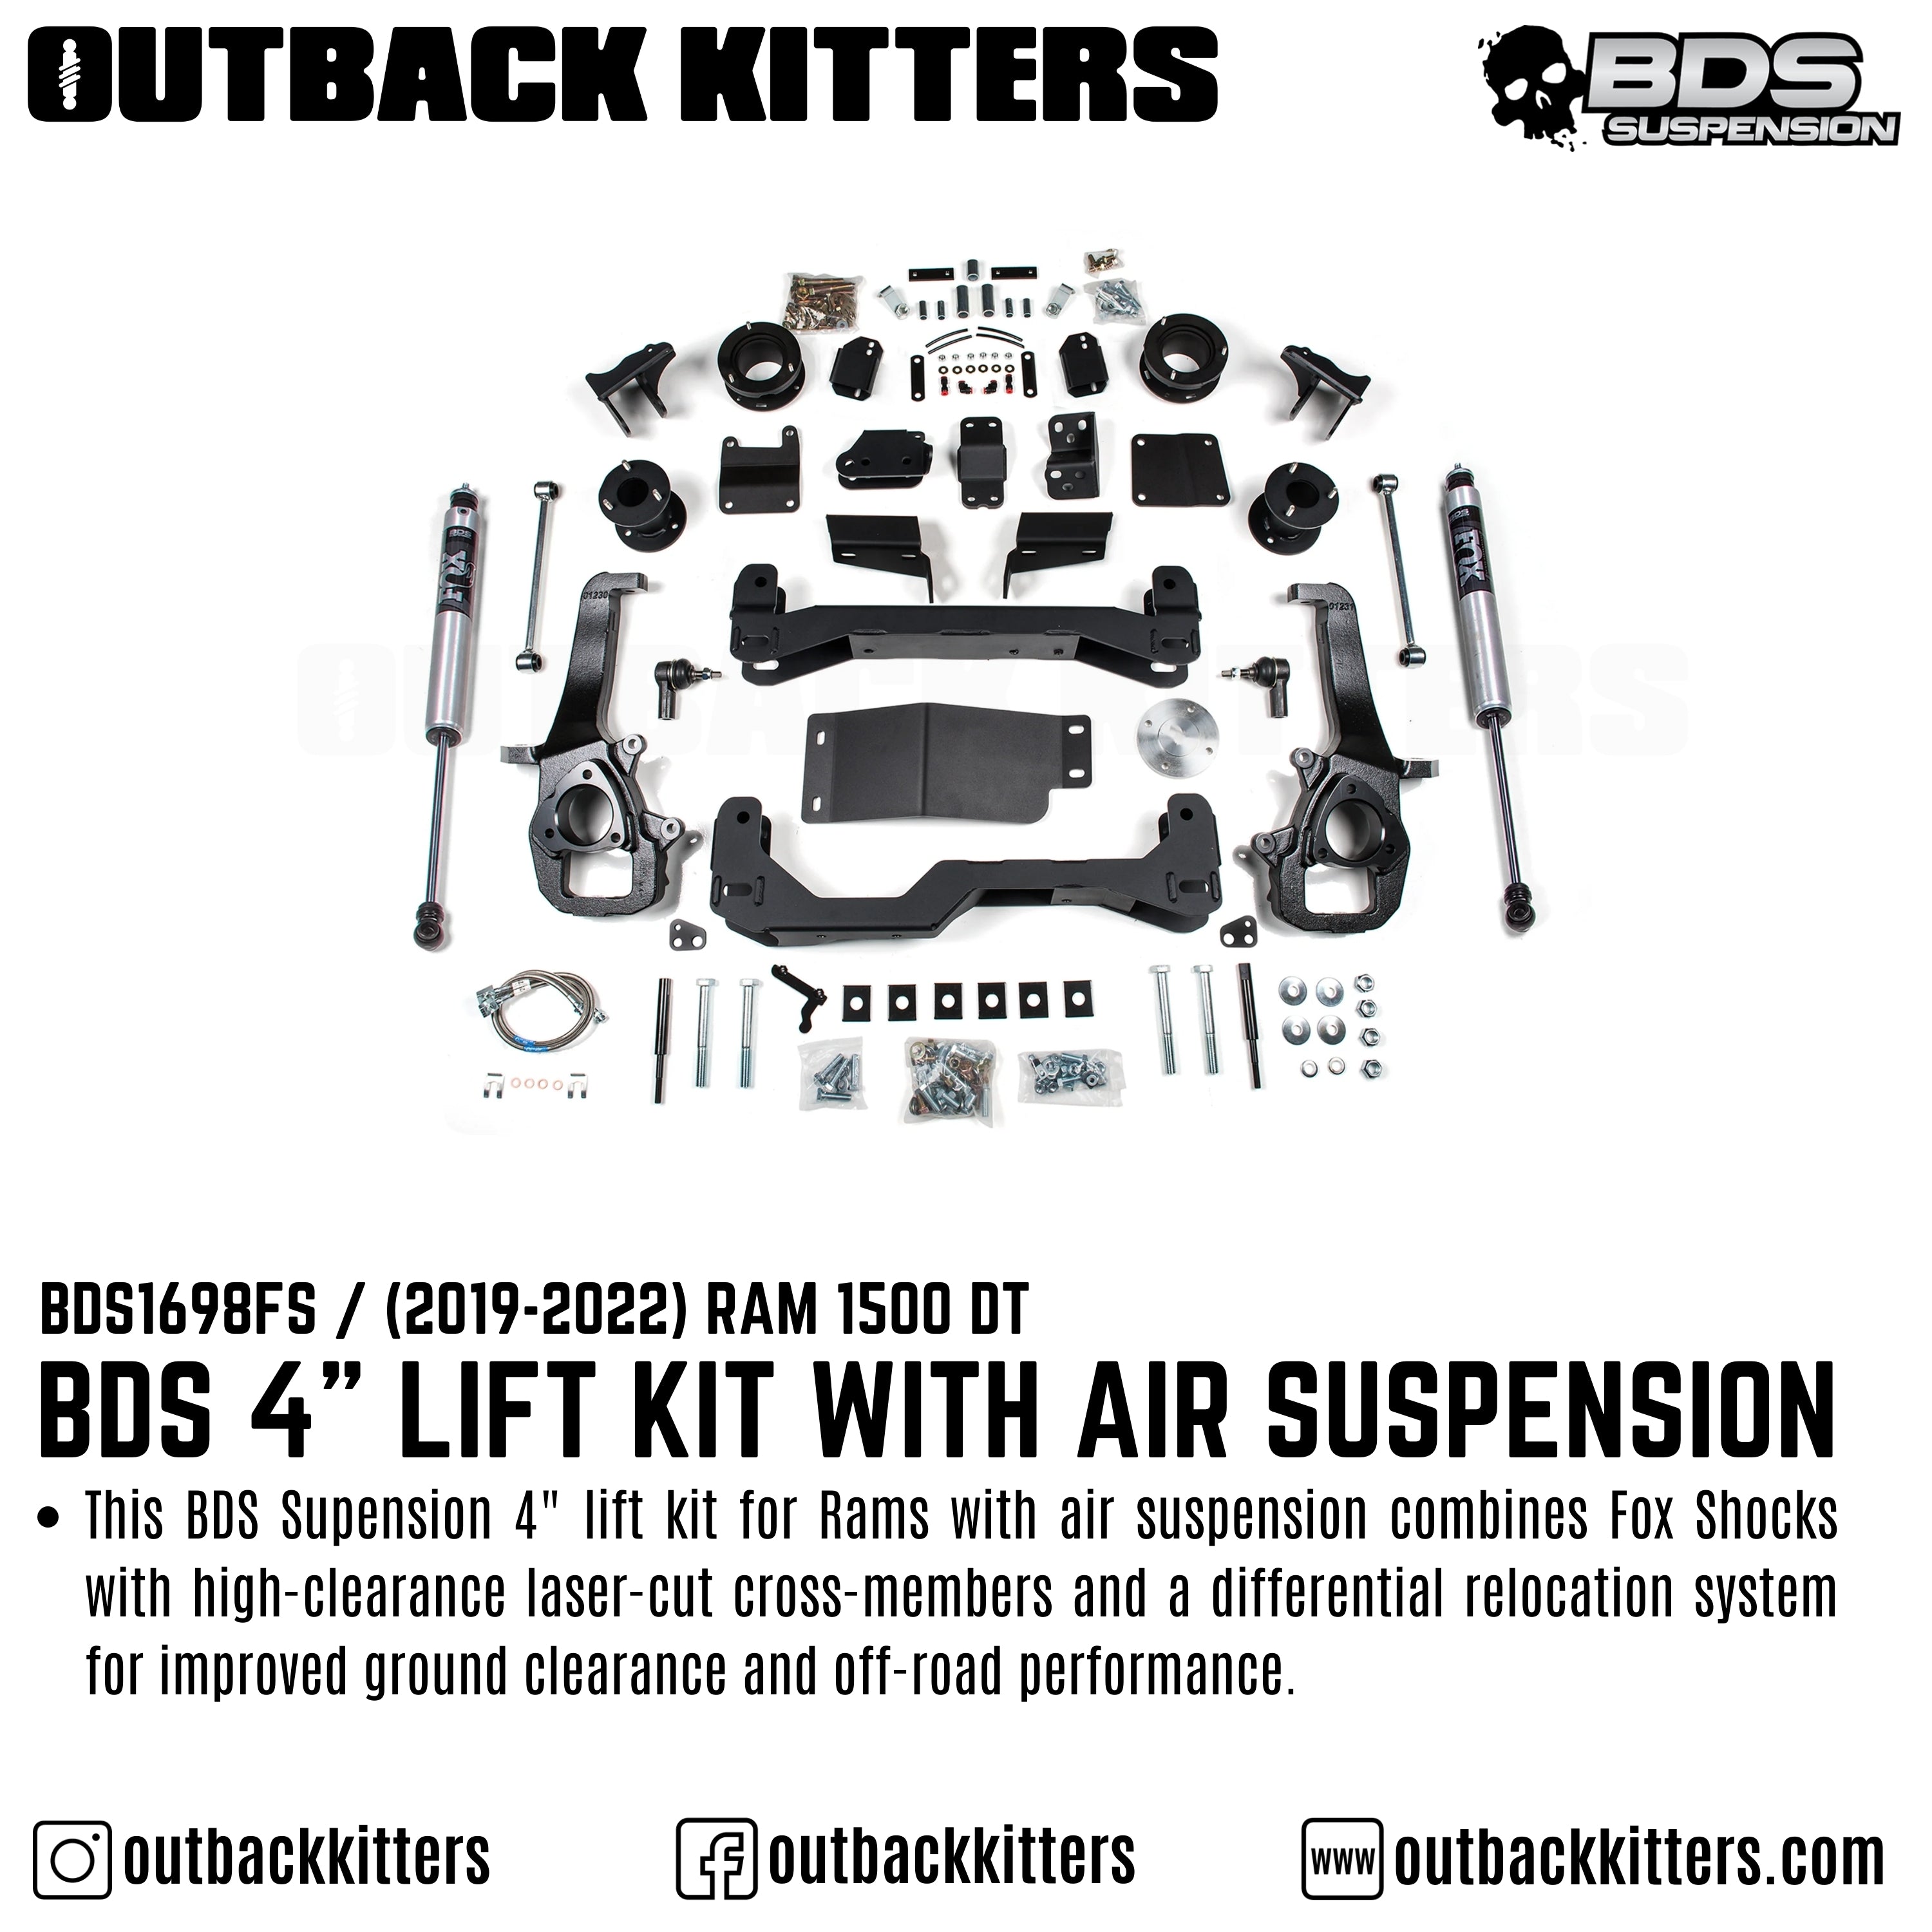 BDS Suspension 4" Lift Kit for Ram 1500 DT Air Suspension - Outback Kitters